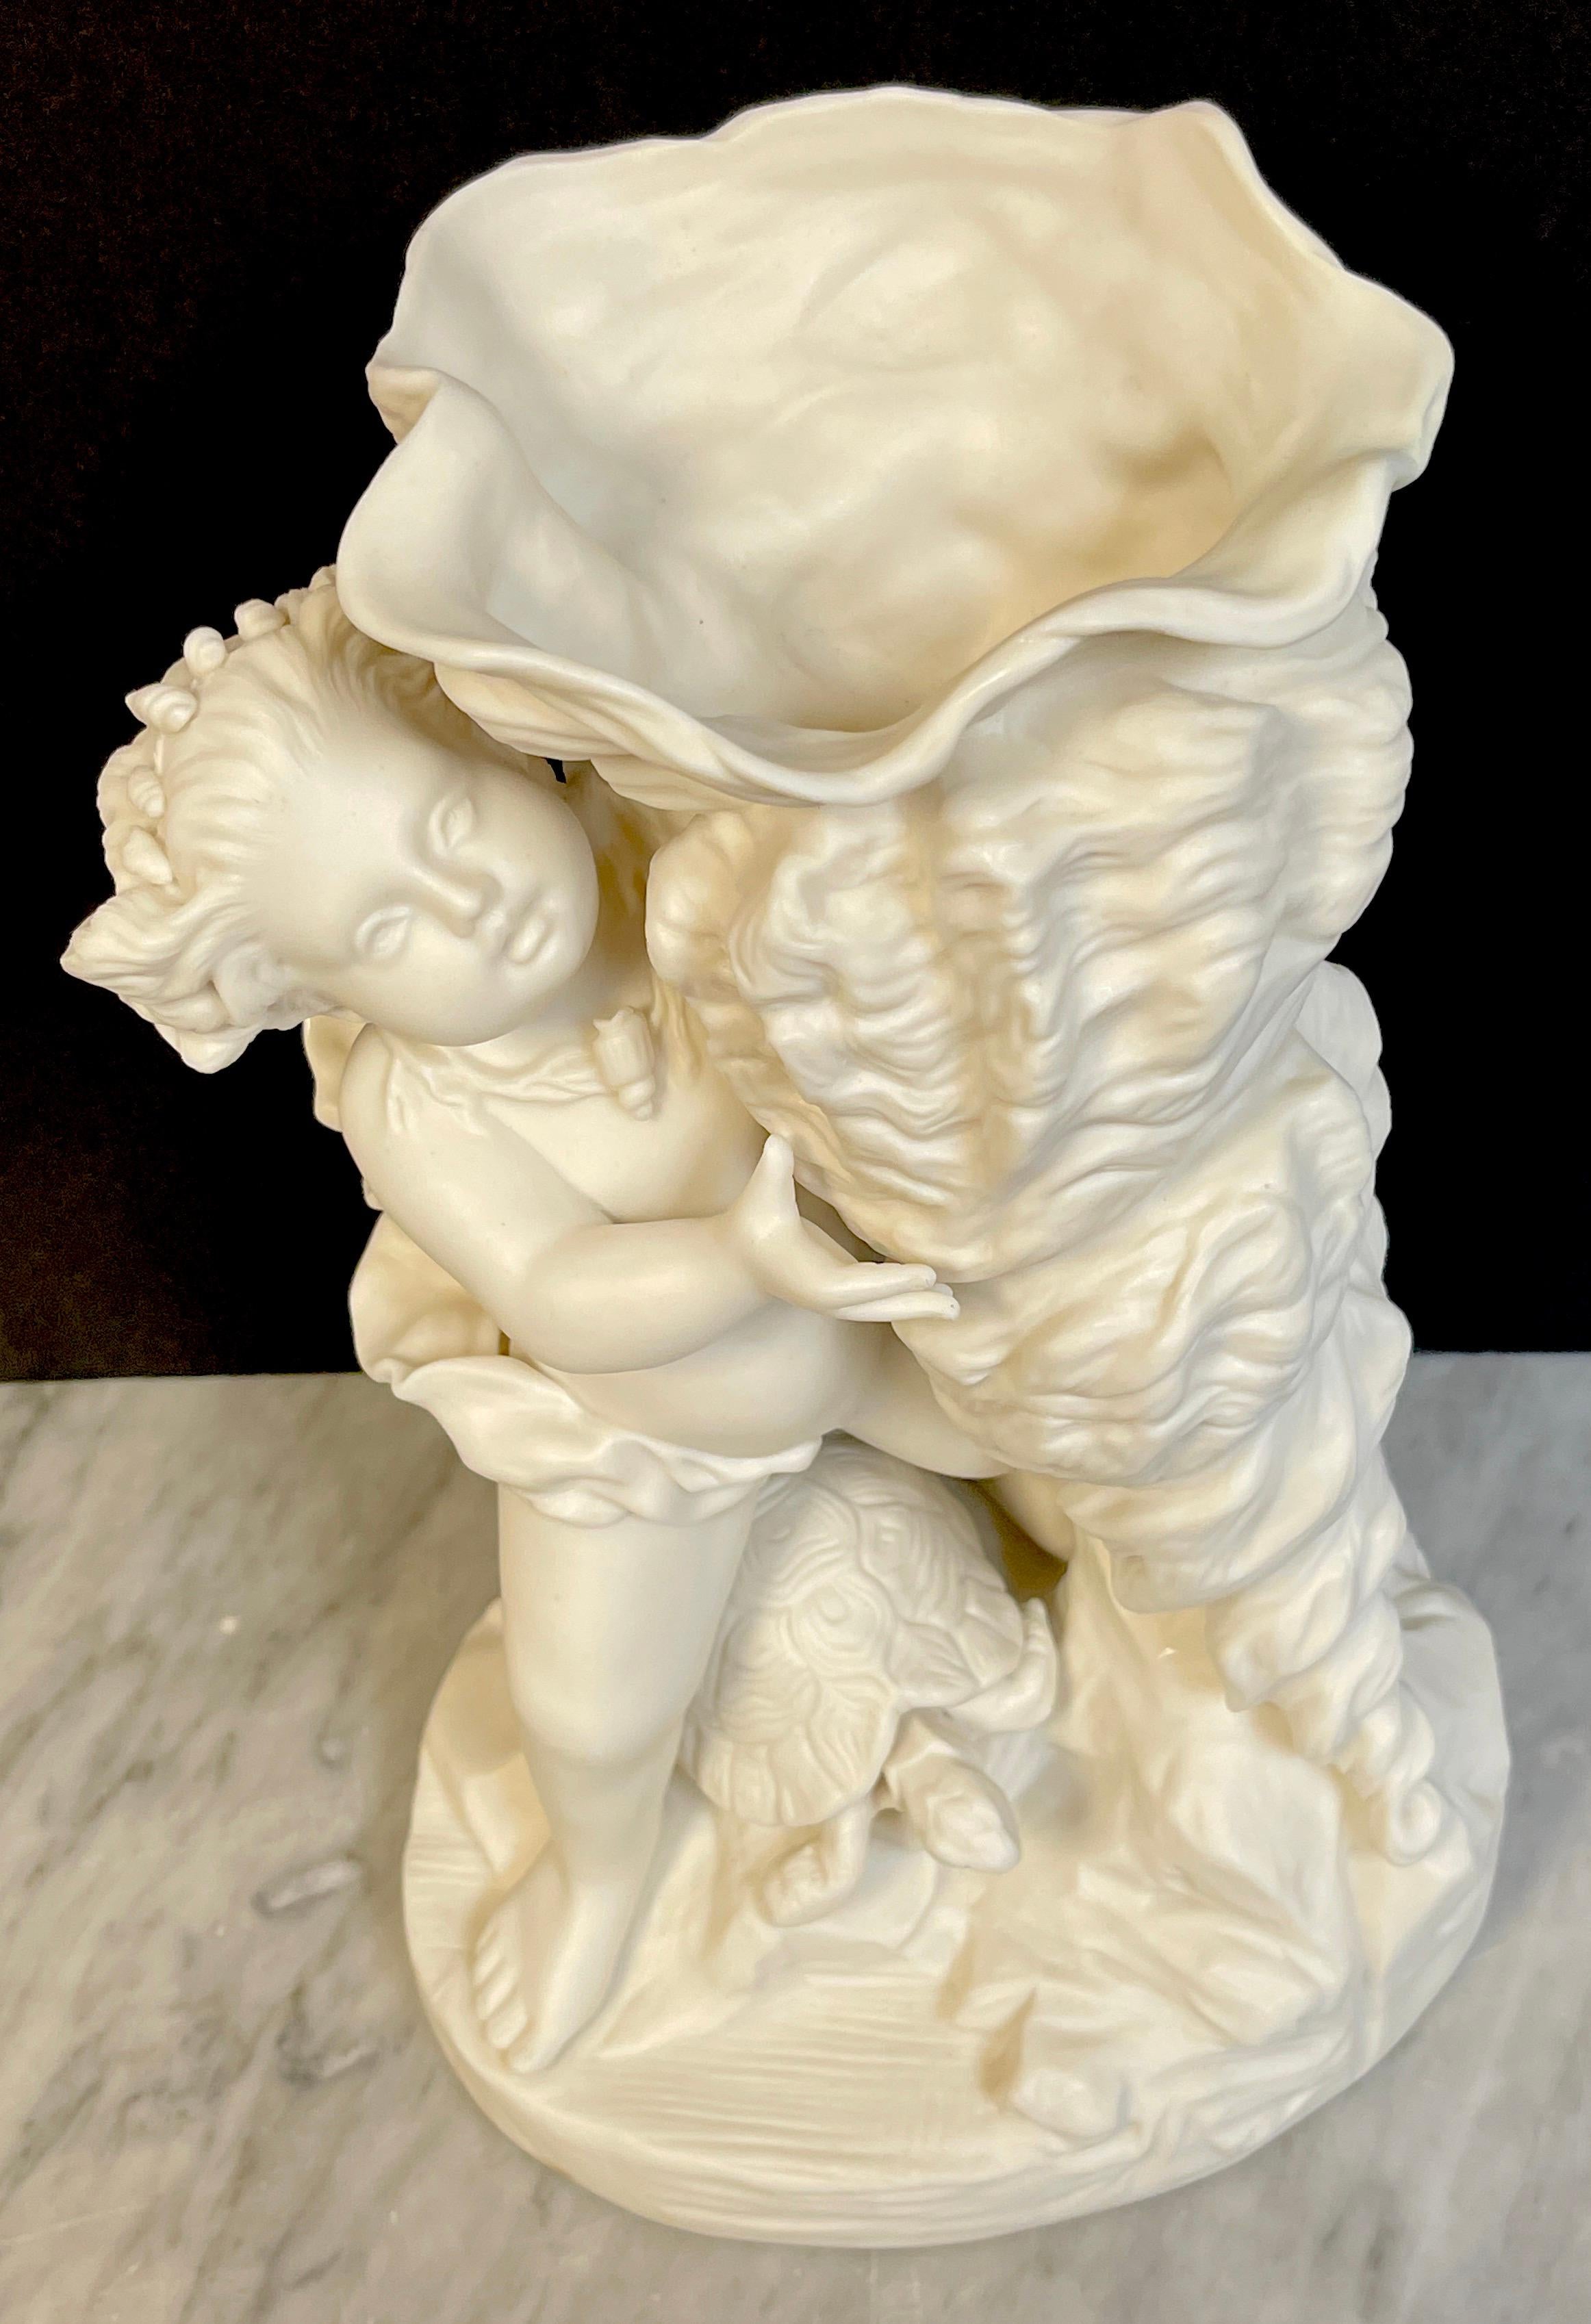 19th C. Royal Copenhagen* Parian Aesthetic Movement Vase by Anna Plenge, 1870 In Good Condition For Sale In West Palm Beach, FL